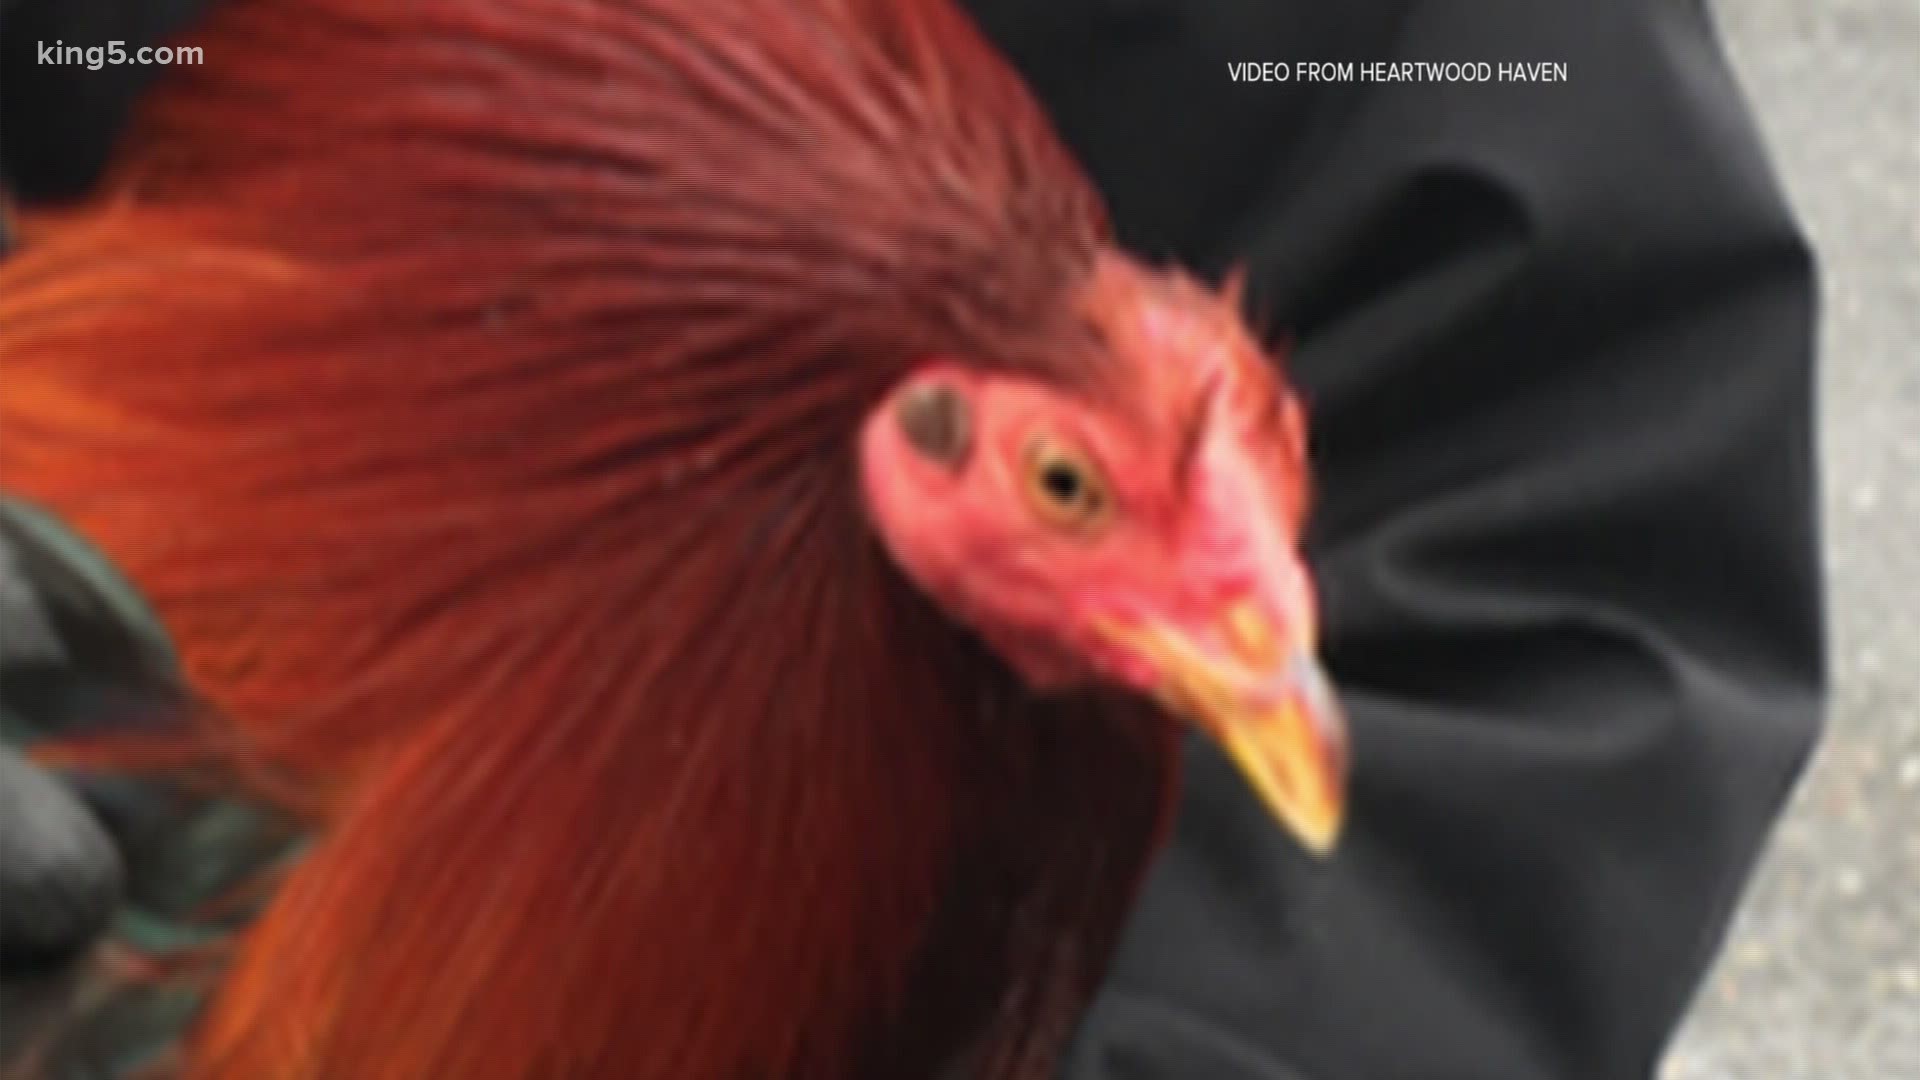 A total of 92 roosters were seized from a home in Kent back in May. King County animal officers believed the birds were being raised and trained for cockfighting.